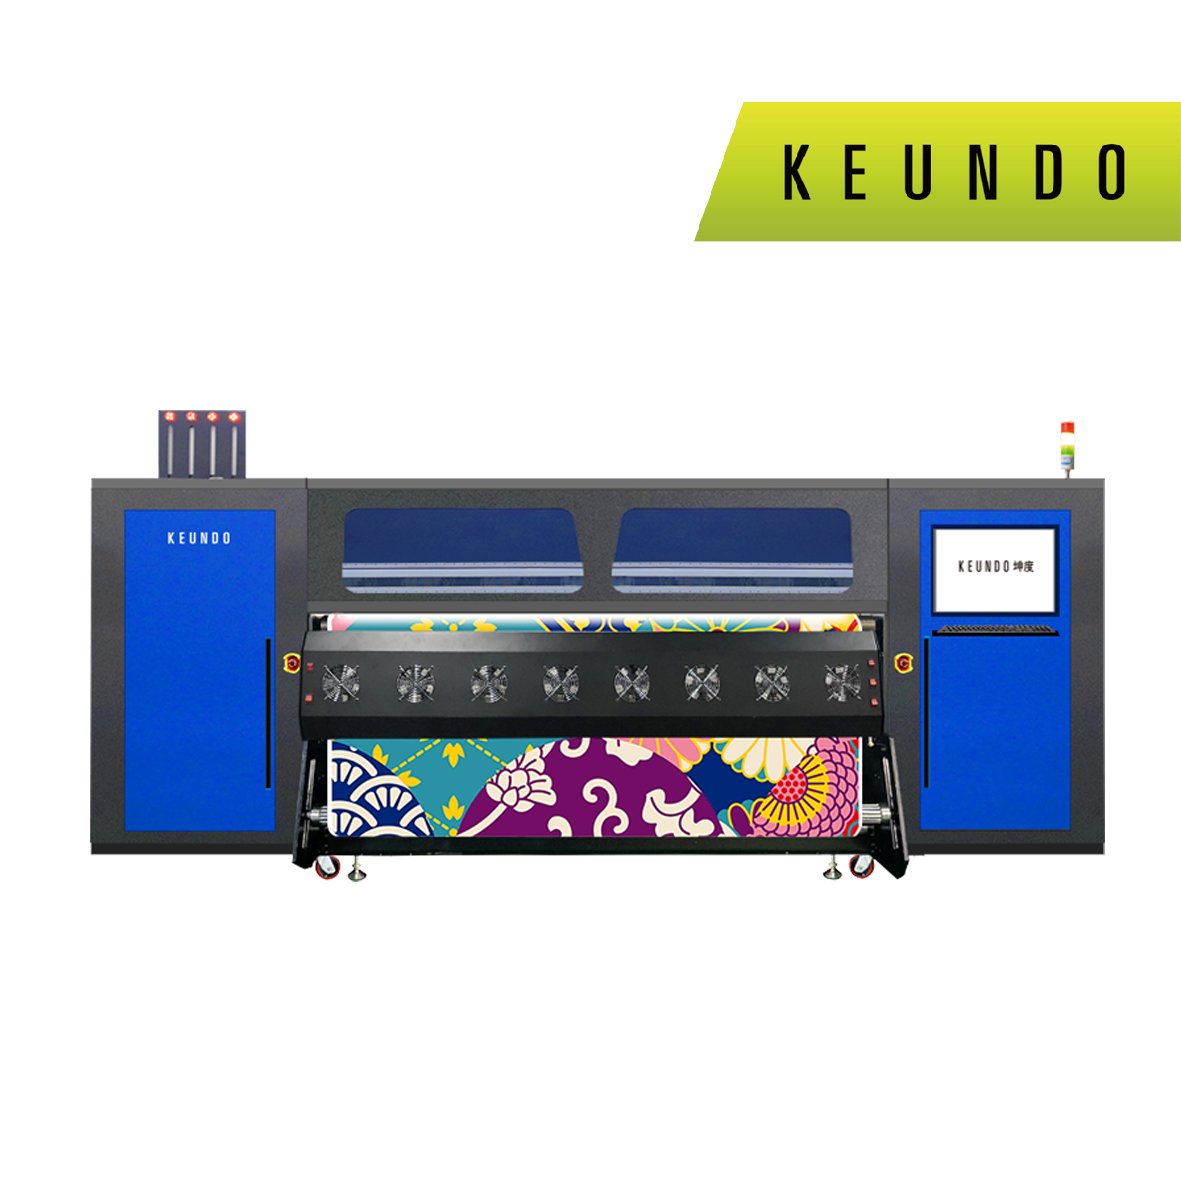 SQ-2208E&2215E Industrial Rubber Roll Dye Sublimation Printer With I3200 Heads